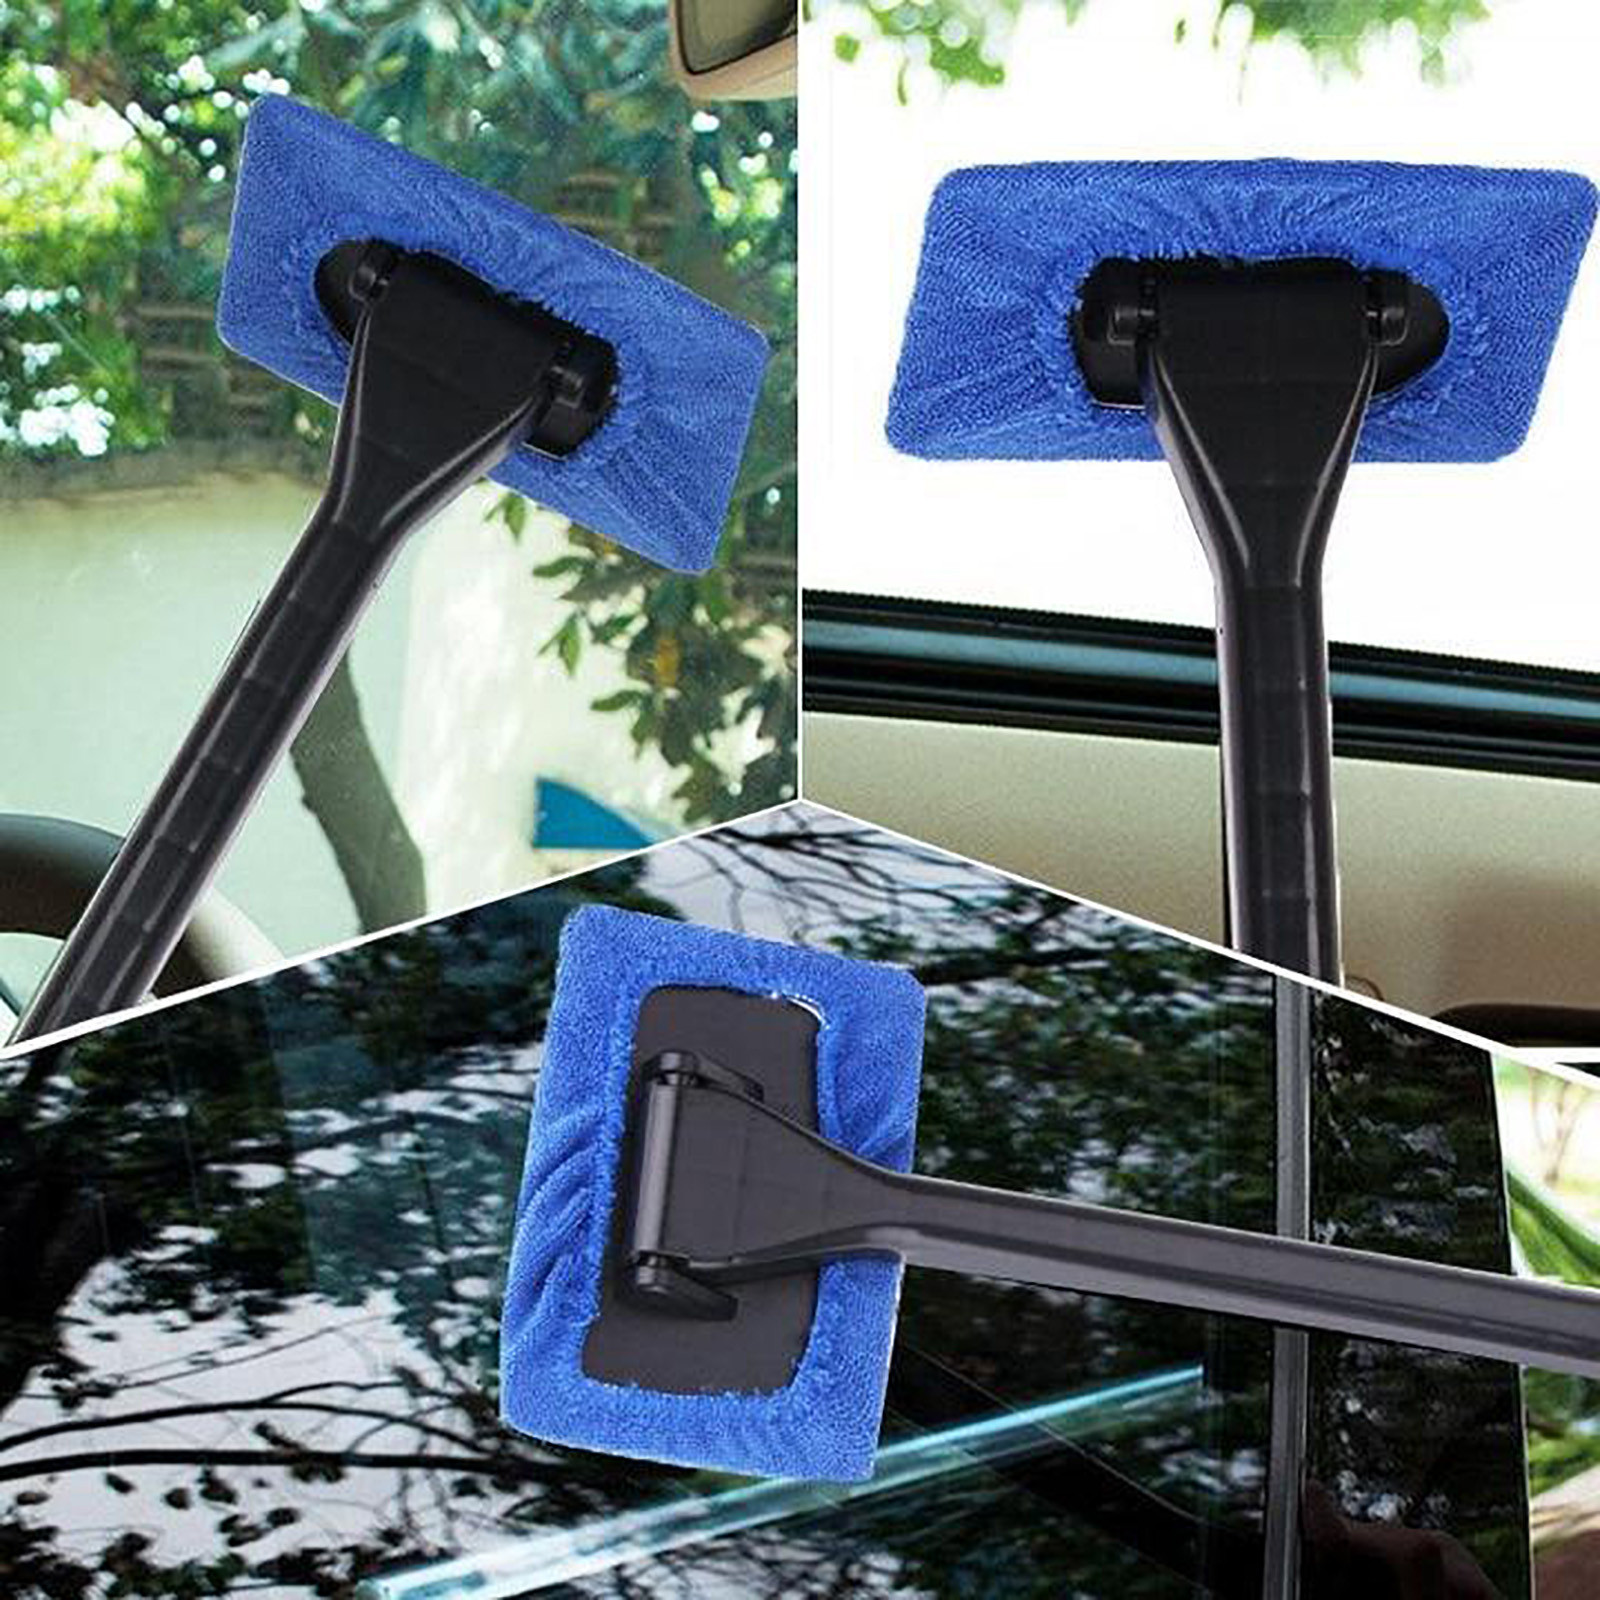 OAVQHLG3B Windshield Cleaner Car Window Cleaner Car Cleaning